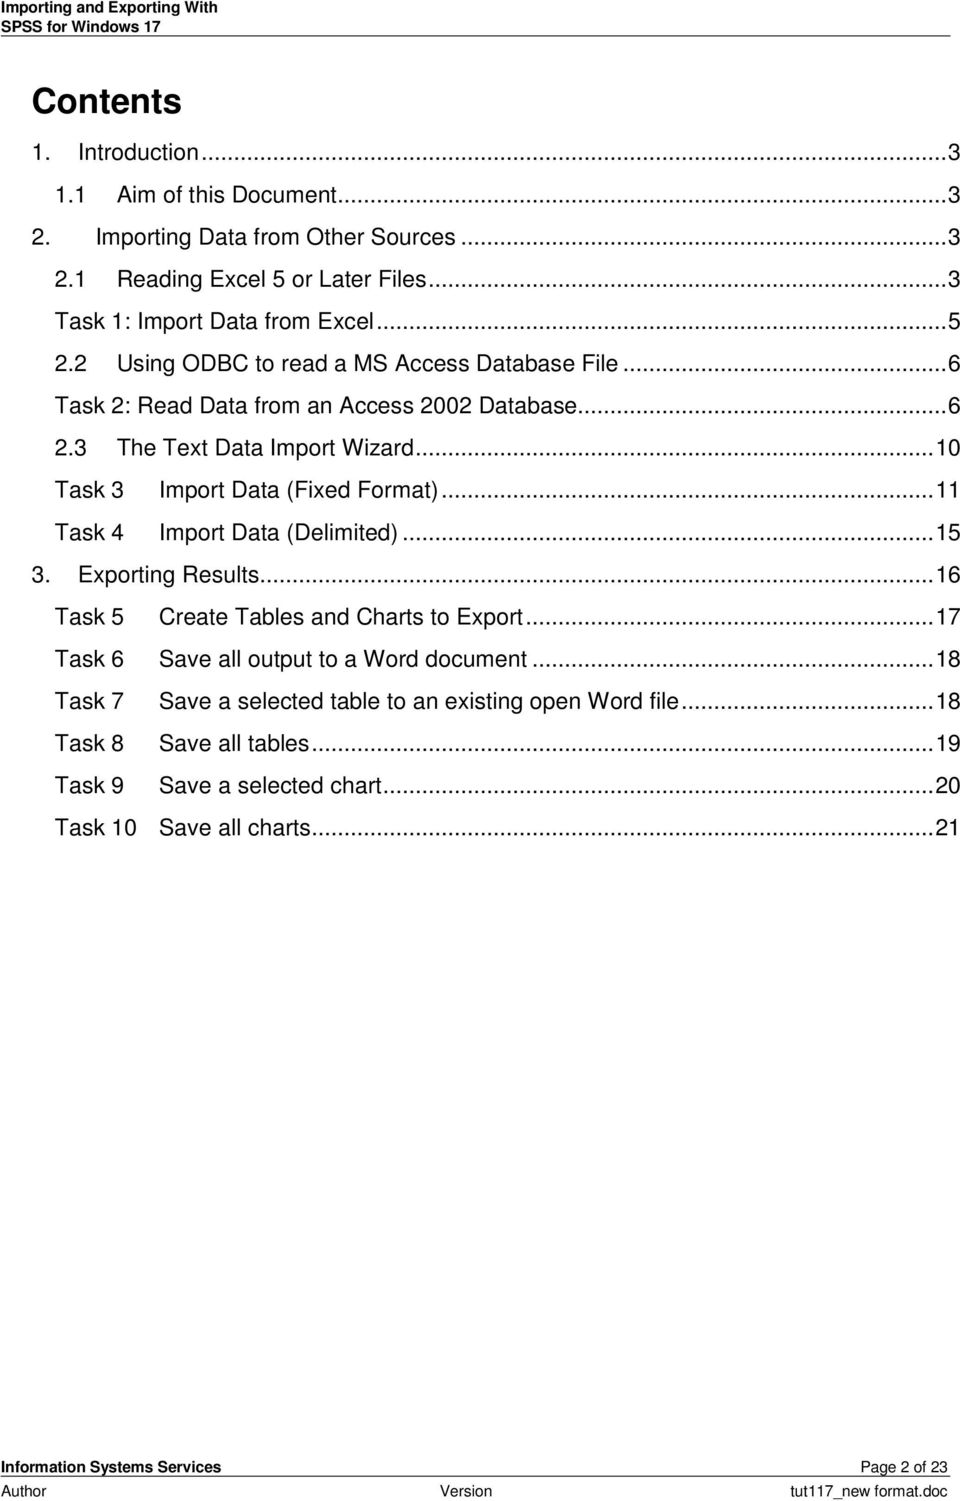 .. 11 Task 4 Import Data (Delimited)... 15 3. Exporting Results... 16 Task 5 Create Tables and Charts to Export... 17 Task 6 Save all output to a Word document.